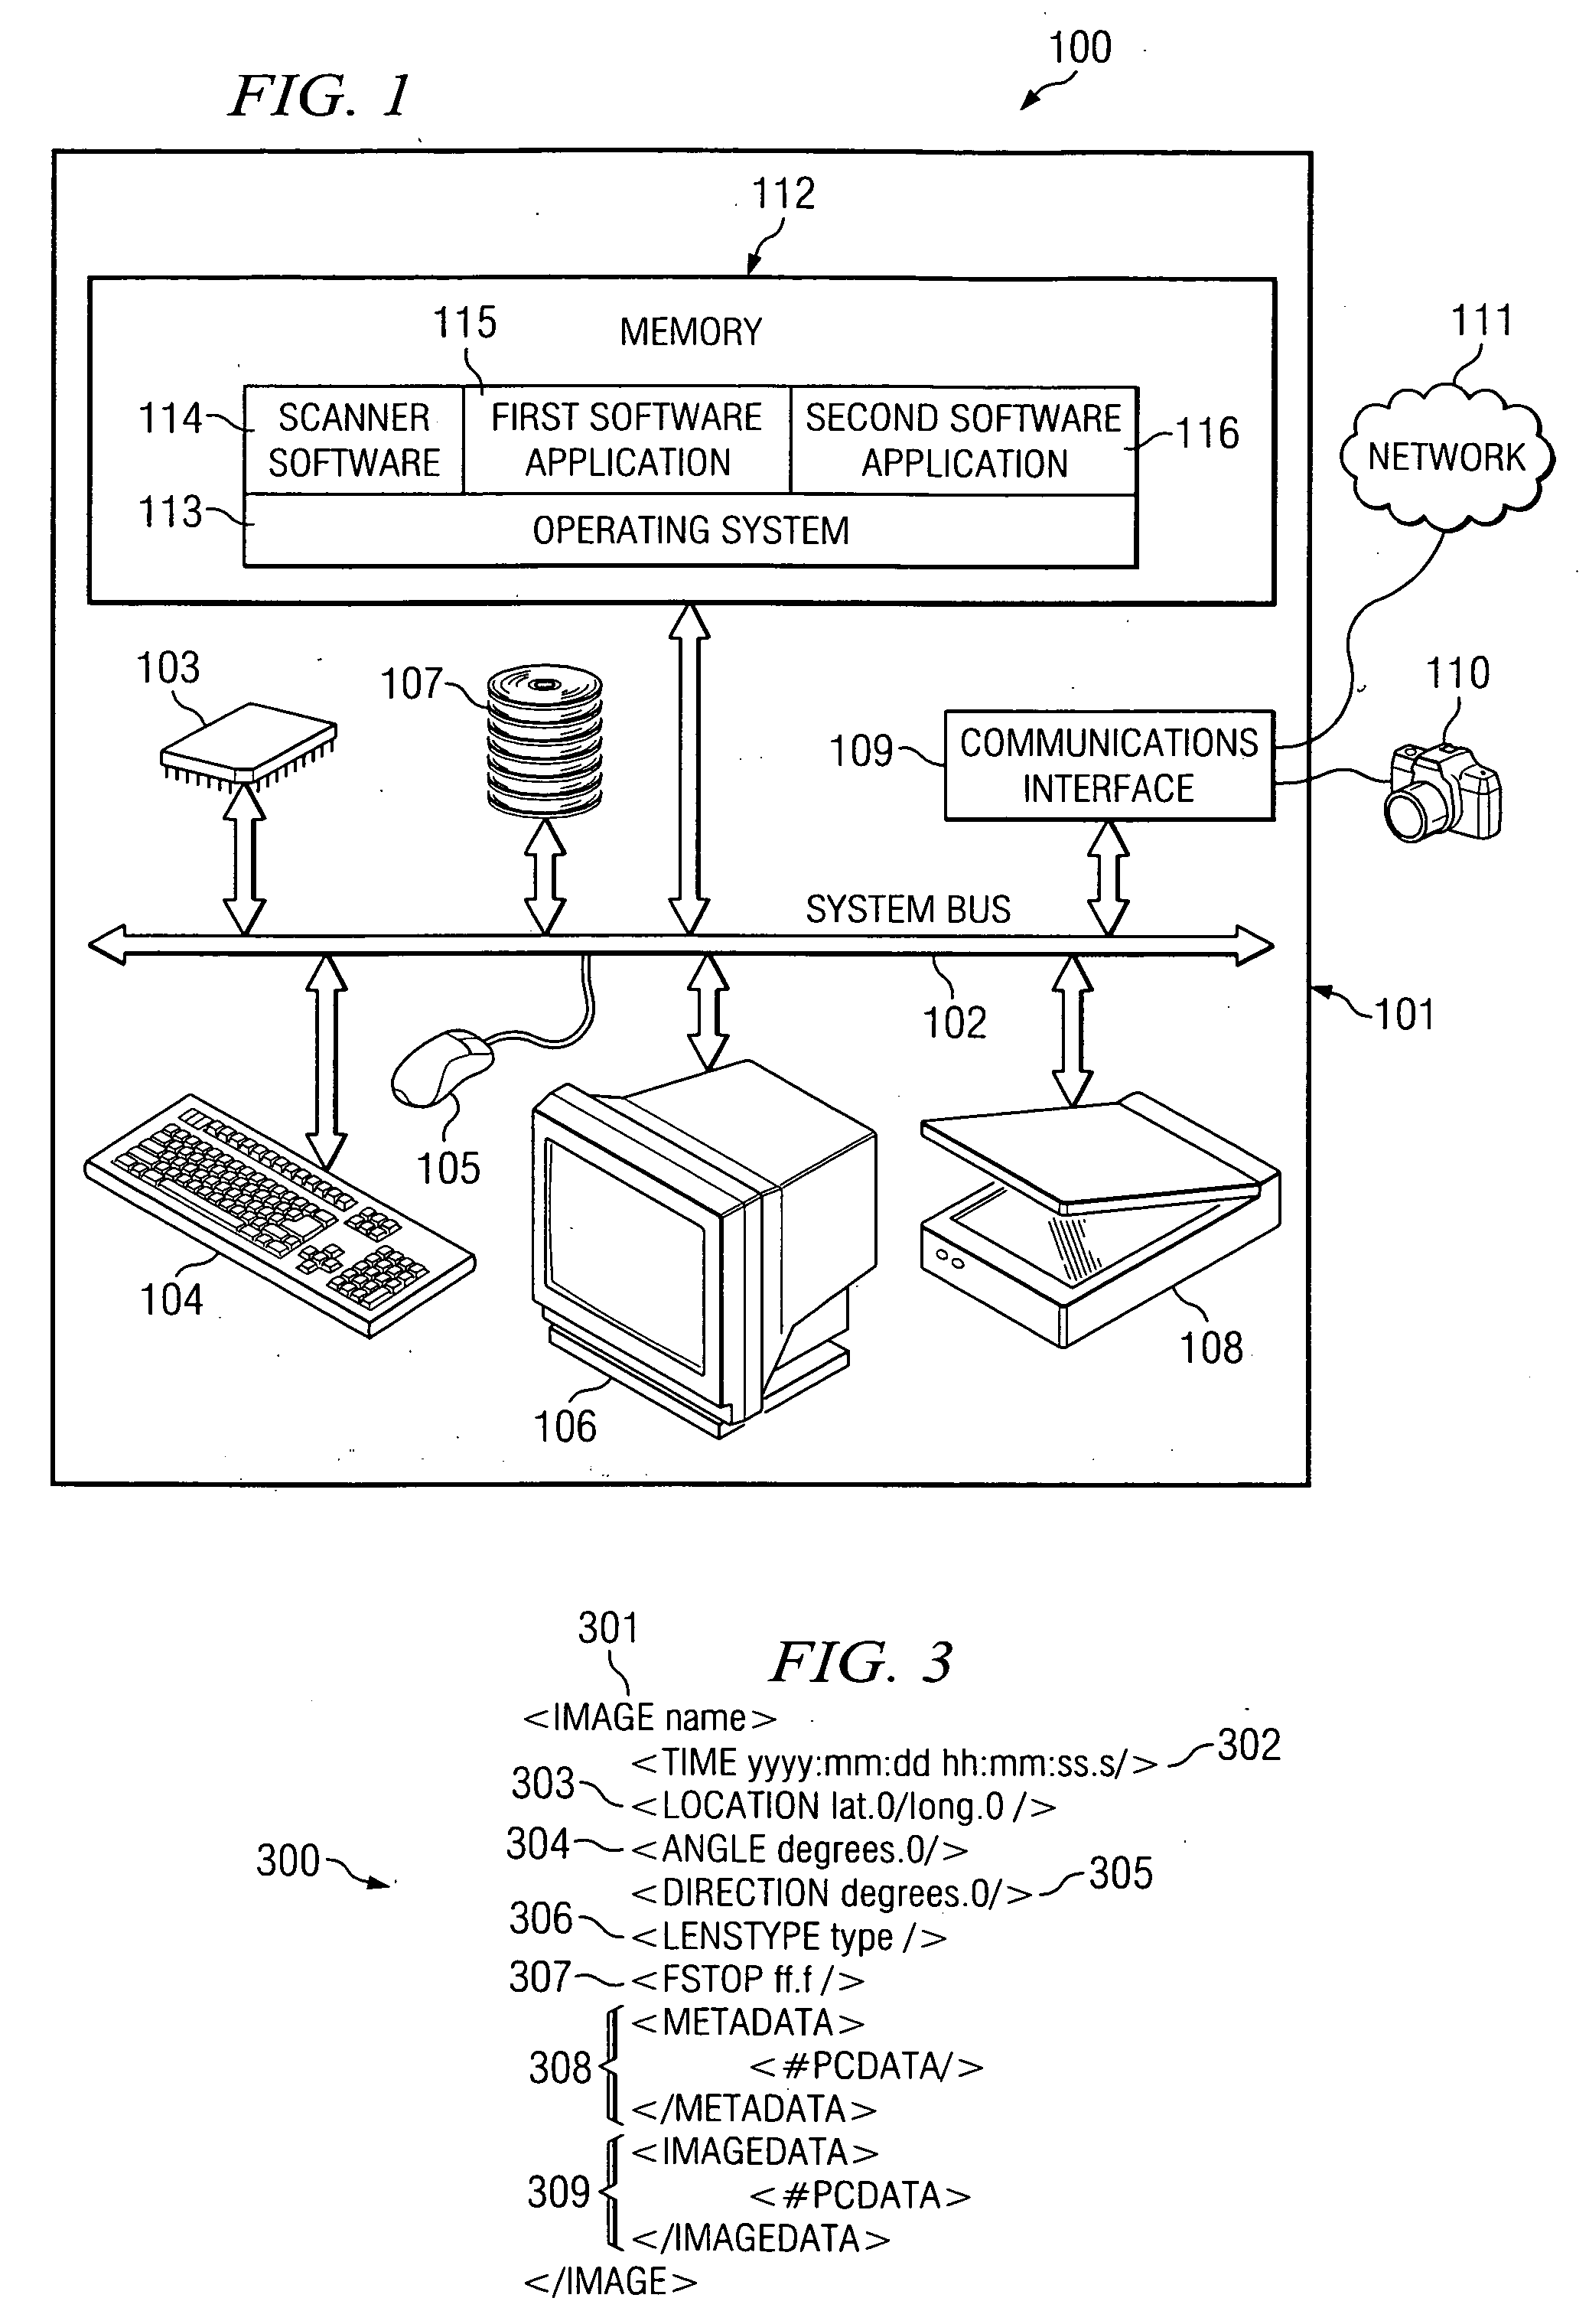 System and method for applying inference information to digital camera metadata to identify digital picture content